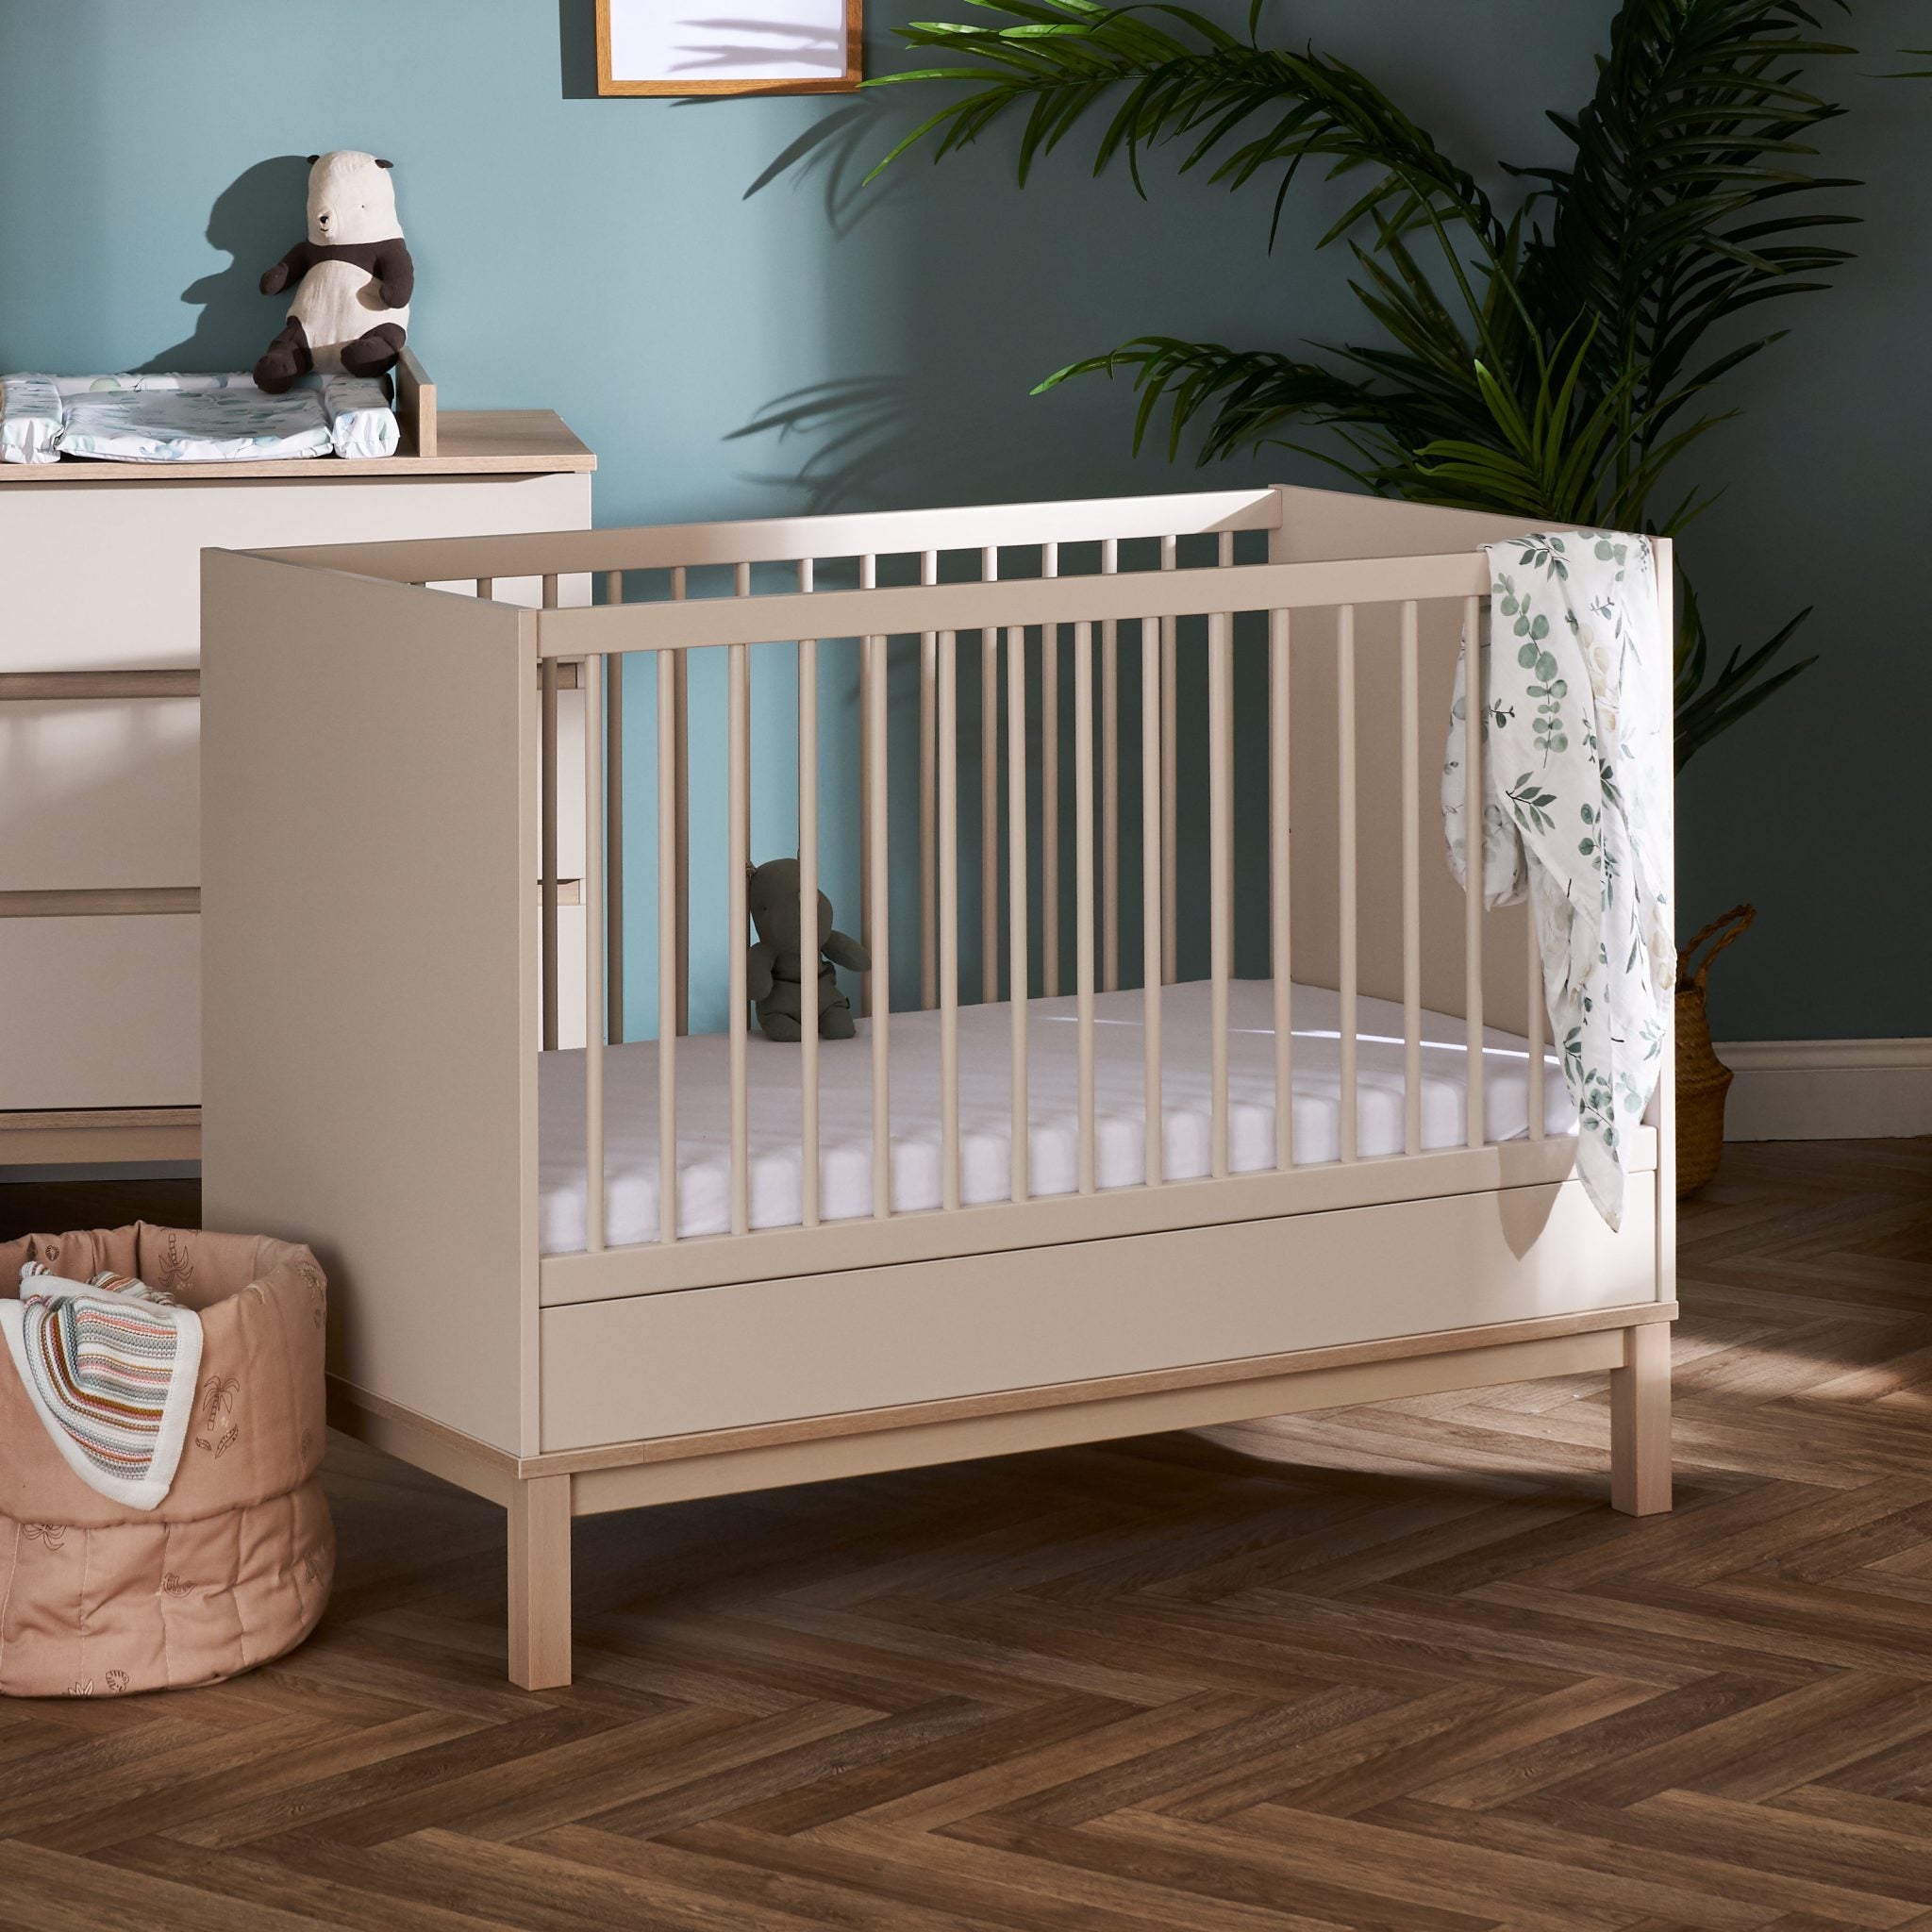 Photos - Cot Obaby Astrid Mini  Bed 20OB3308 